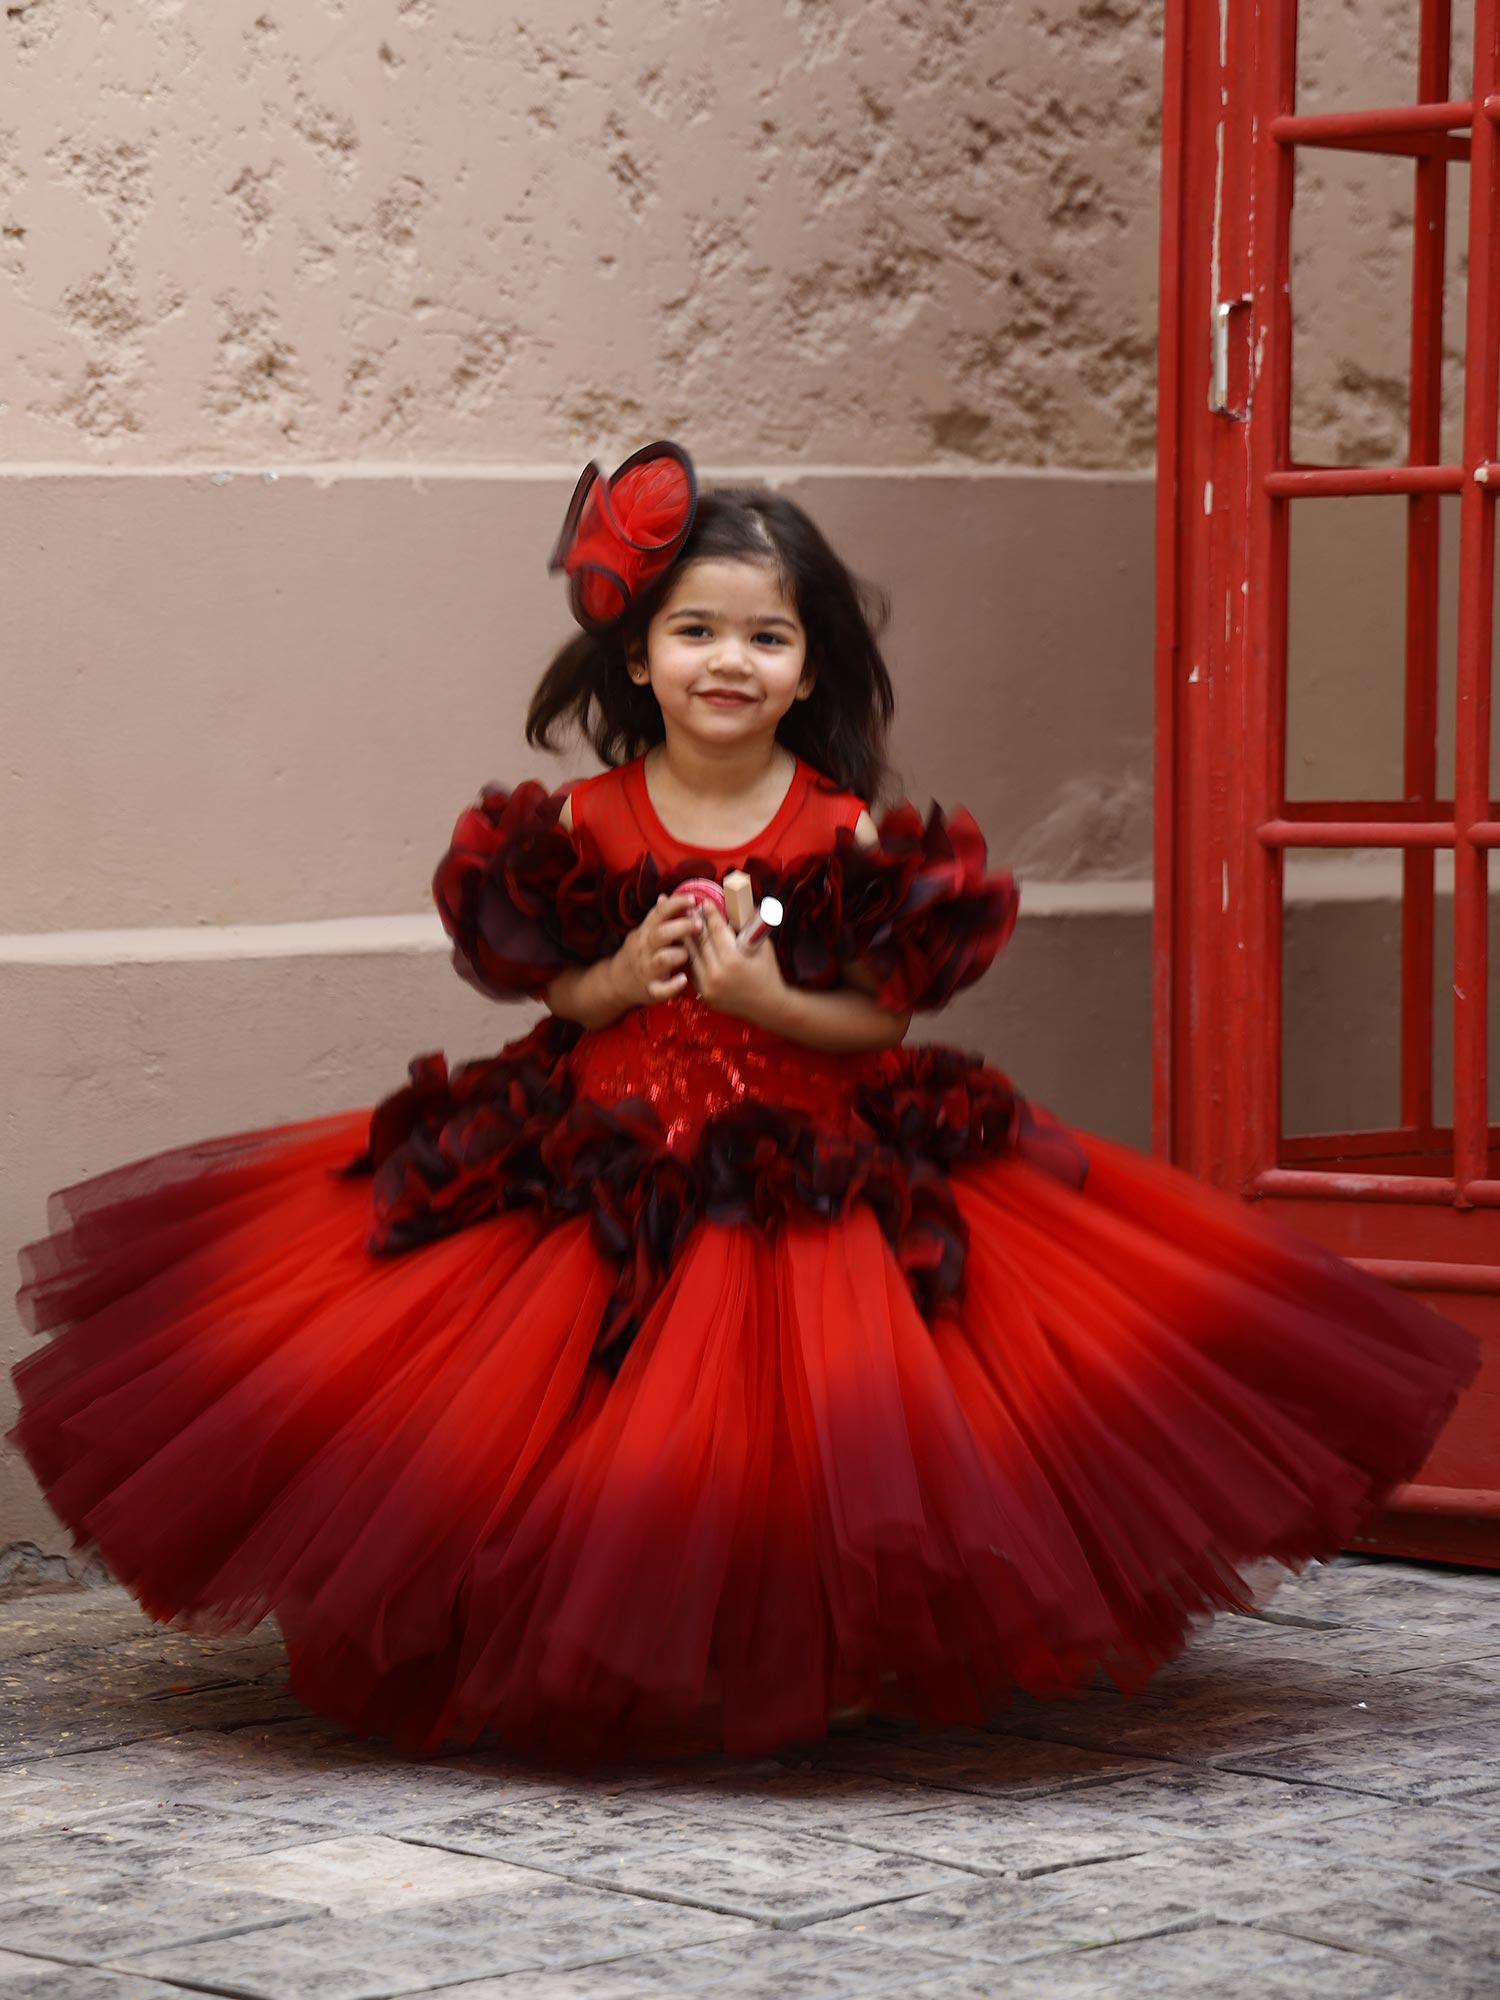 Birthday Red Shaded Ava Roses Gown With hair accessory